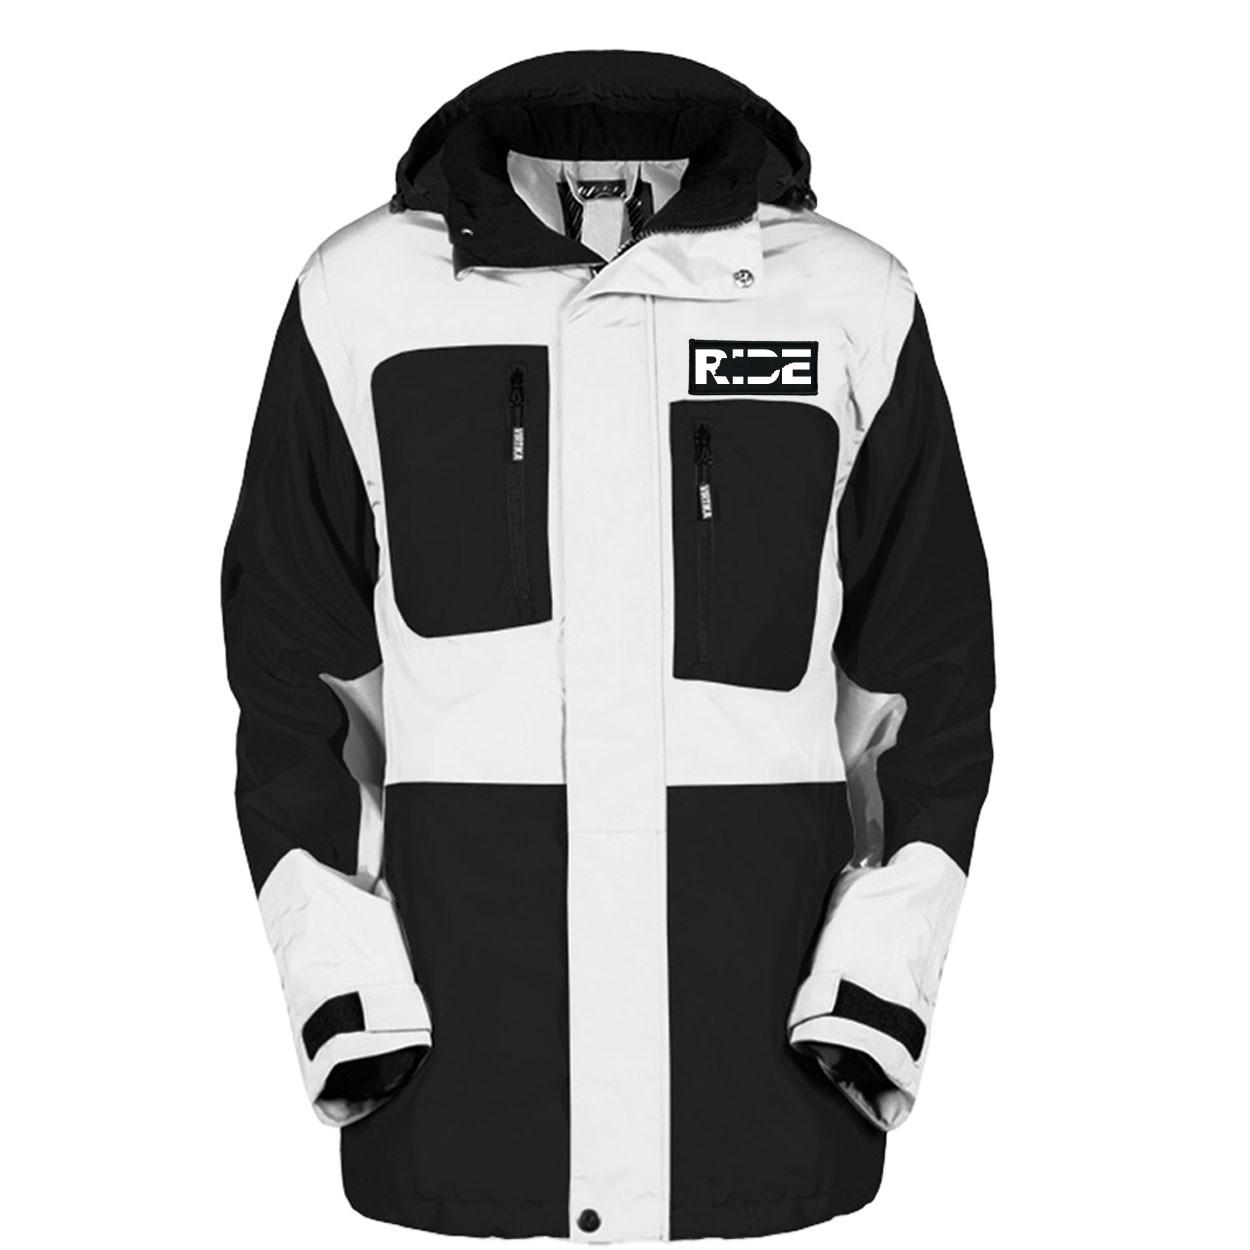 Ride Tennessee Classic Woven Patch Pro Snowboard Jacket (Black/White)